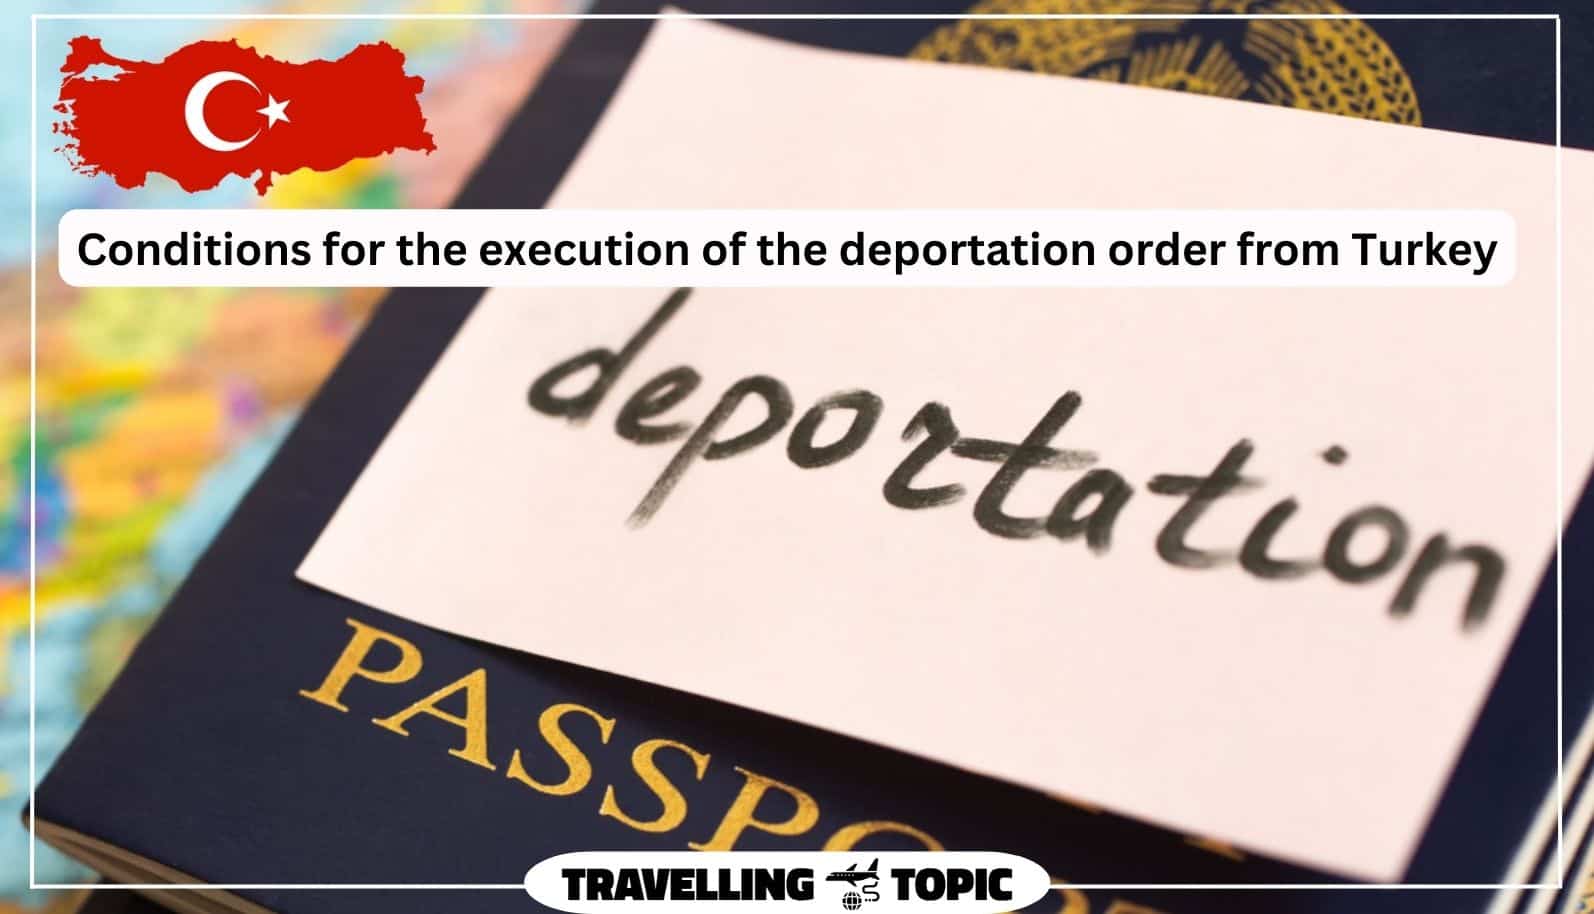 Conditions for the execution of the deportation order from Turkey